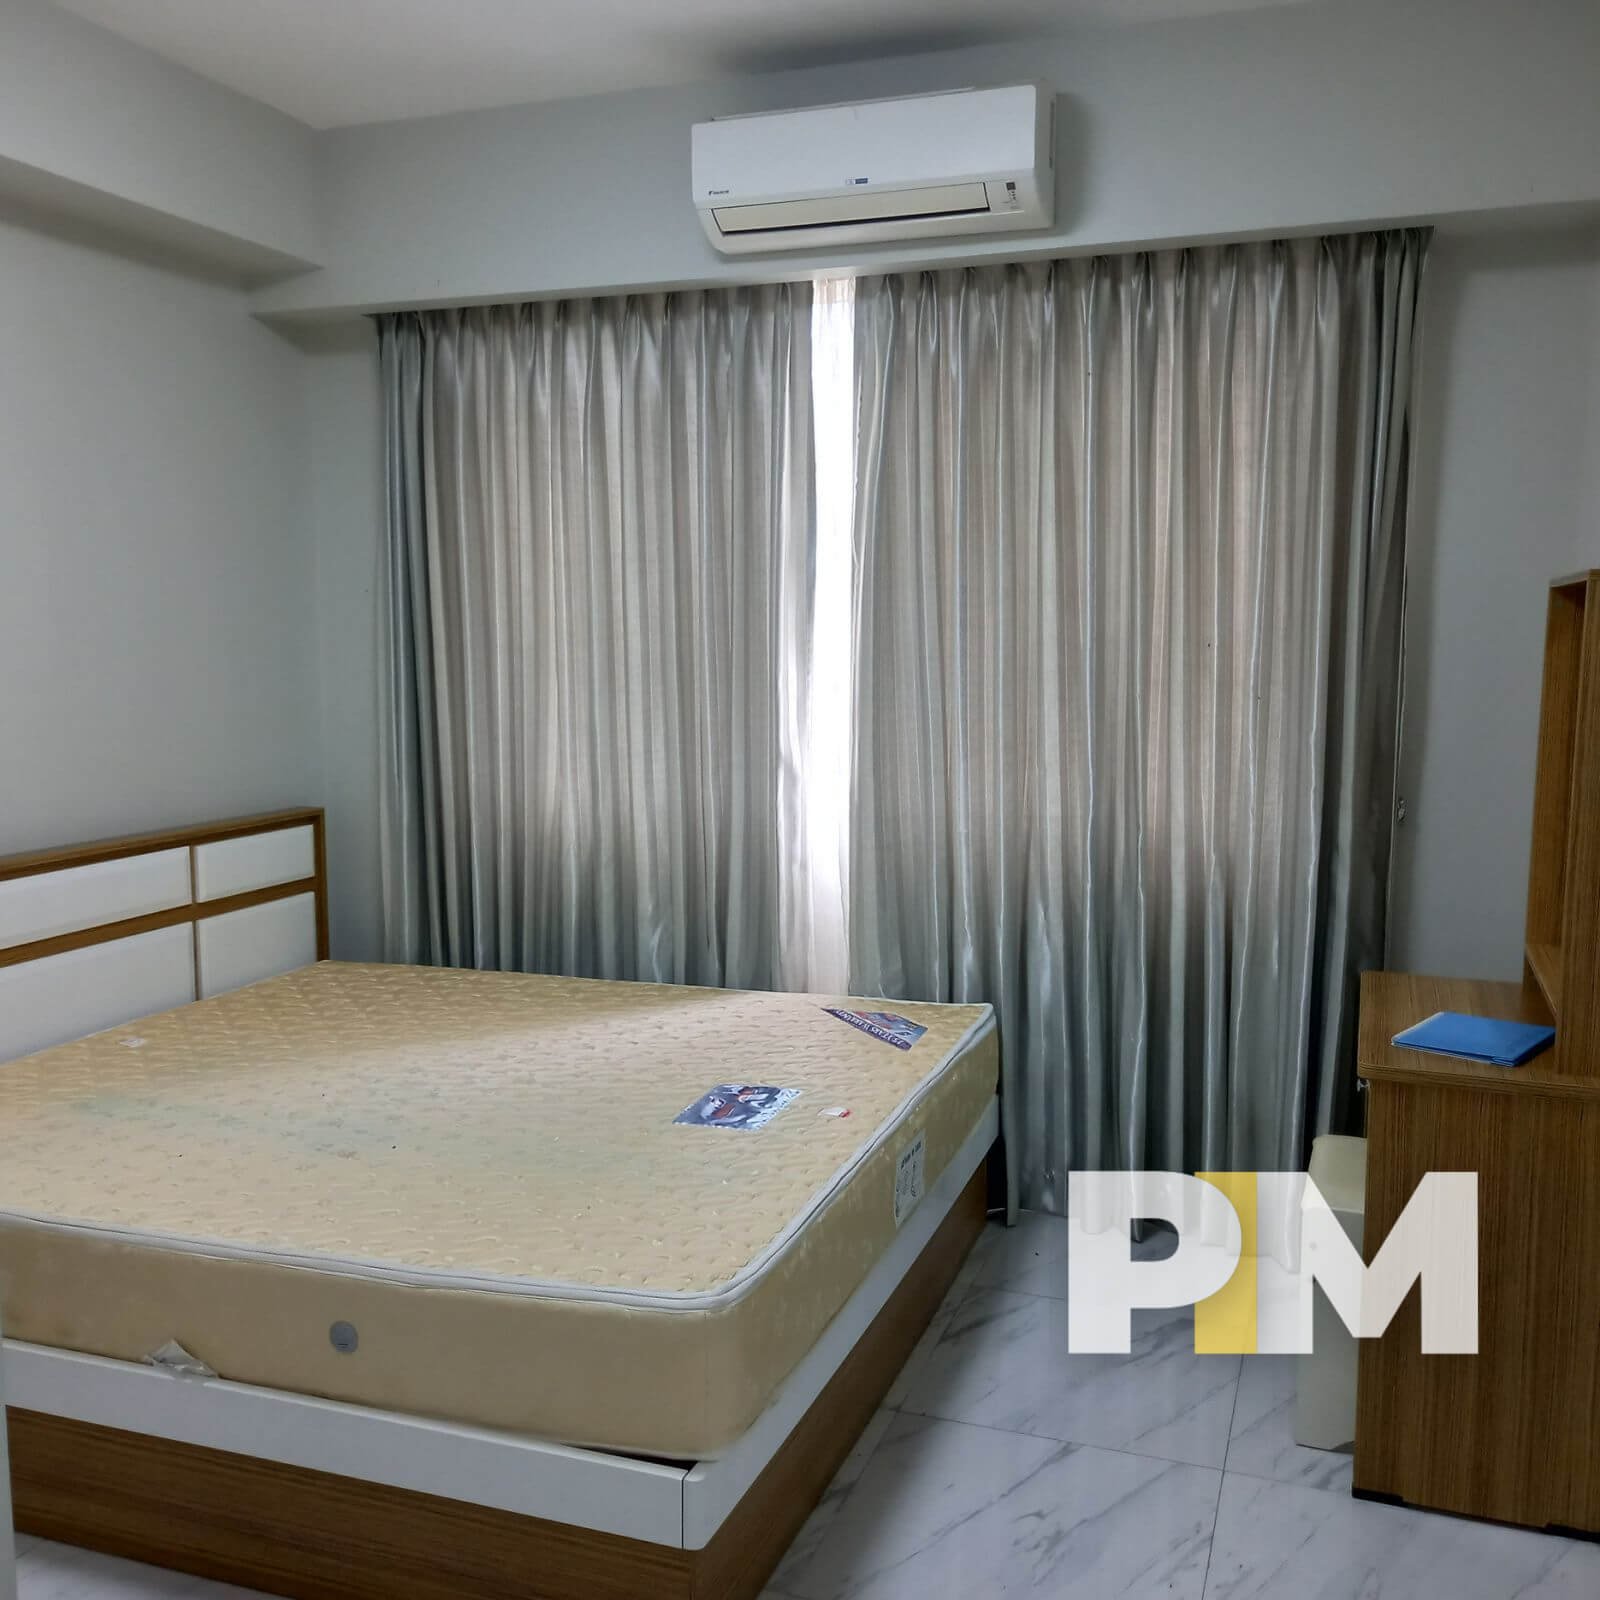 Bedroom with air-conditioner - Yangon Real Estate